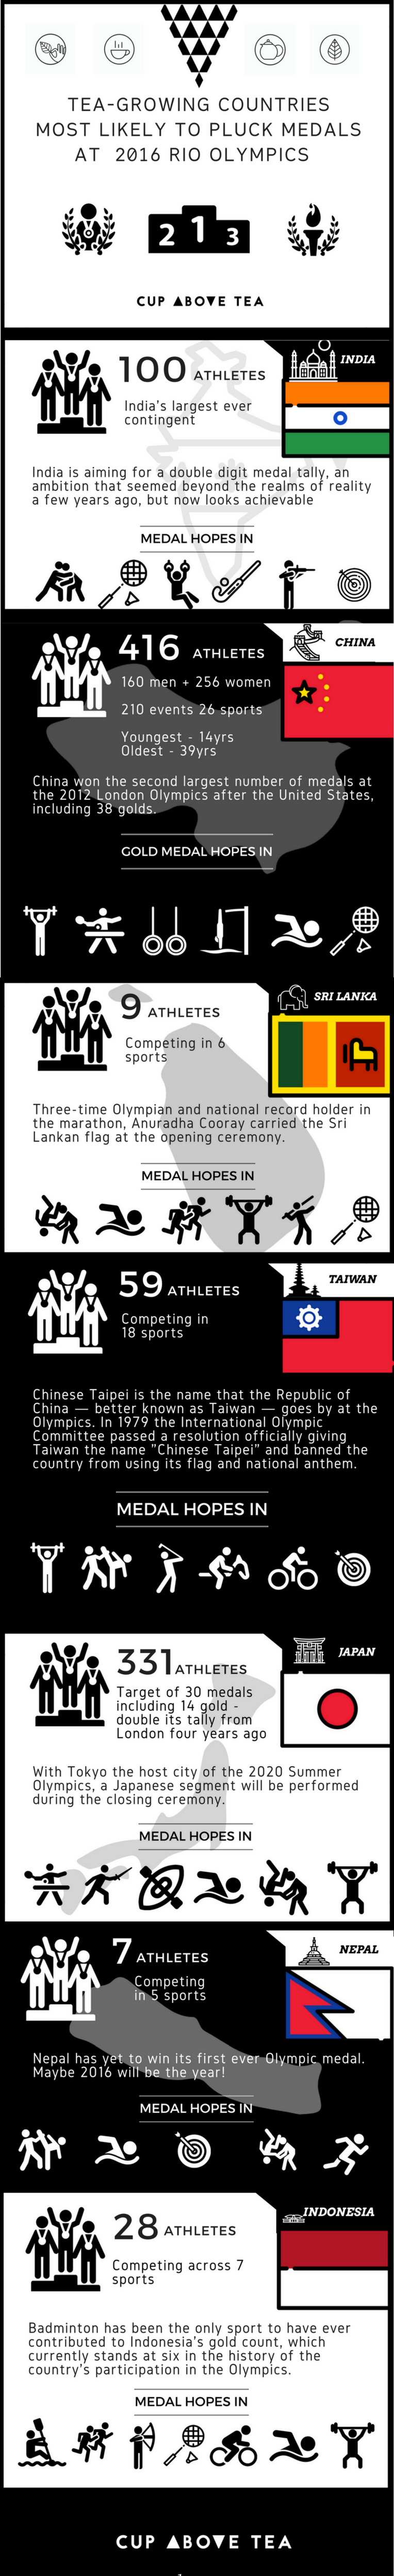 The tea-growing countries most likely to pluck medals at the 2016 Rio Olympics  